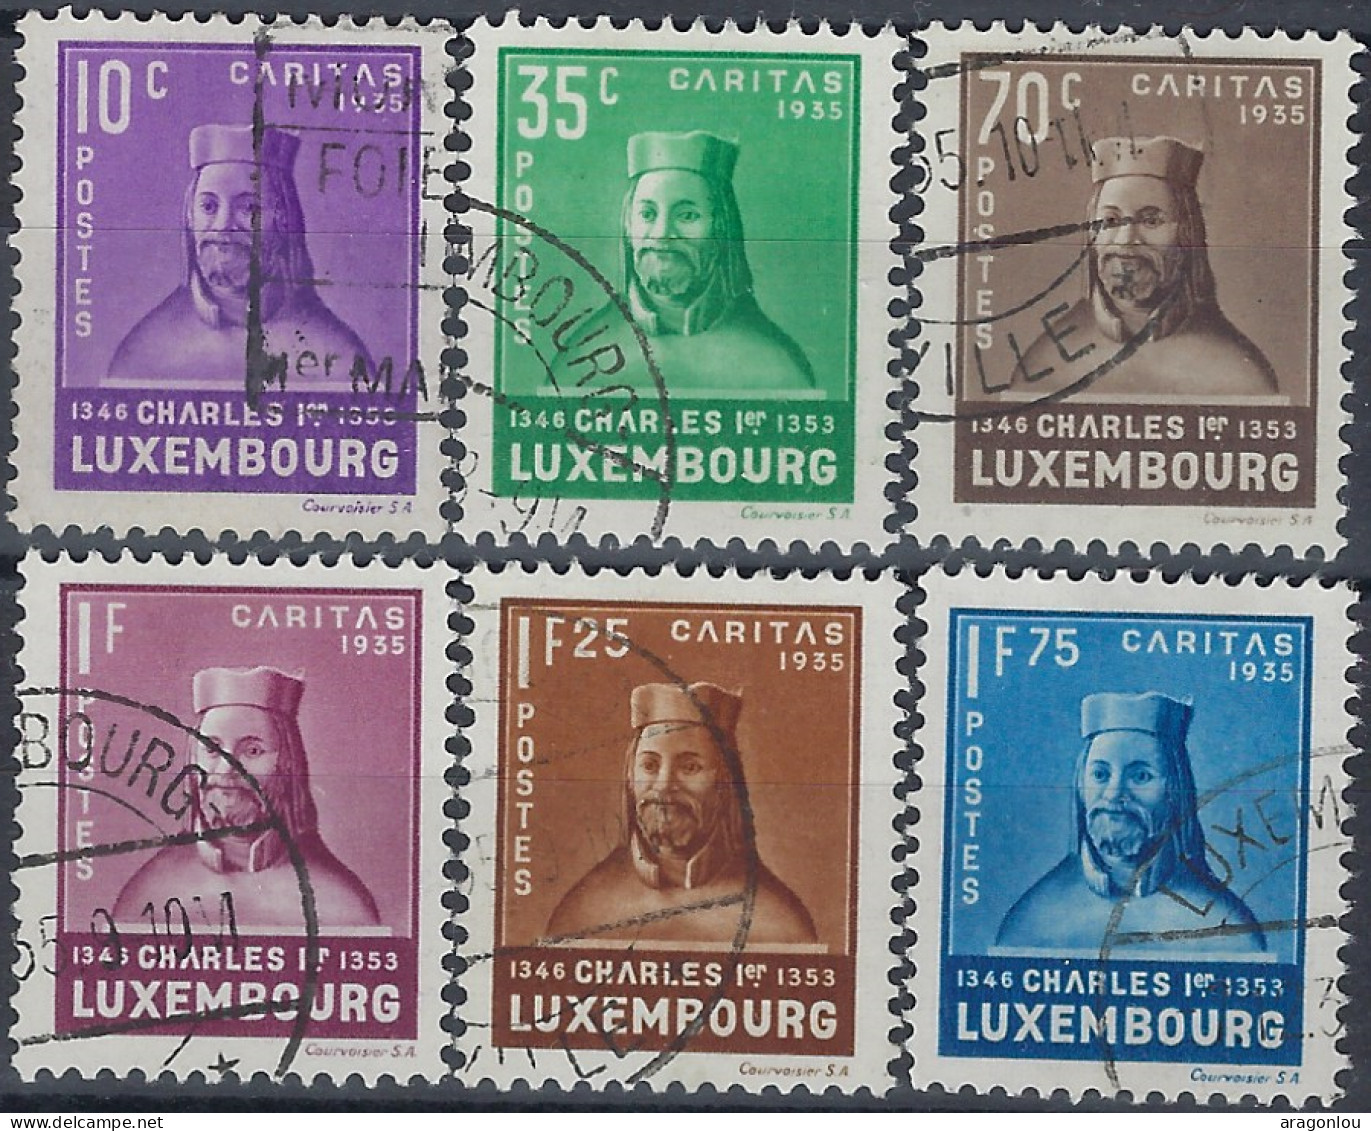 Luxembourg - Luxemburrg - Timbres  1935    Charles Le 1ier     Série   ° - Usados